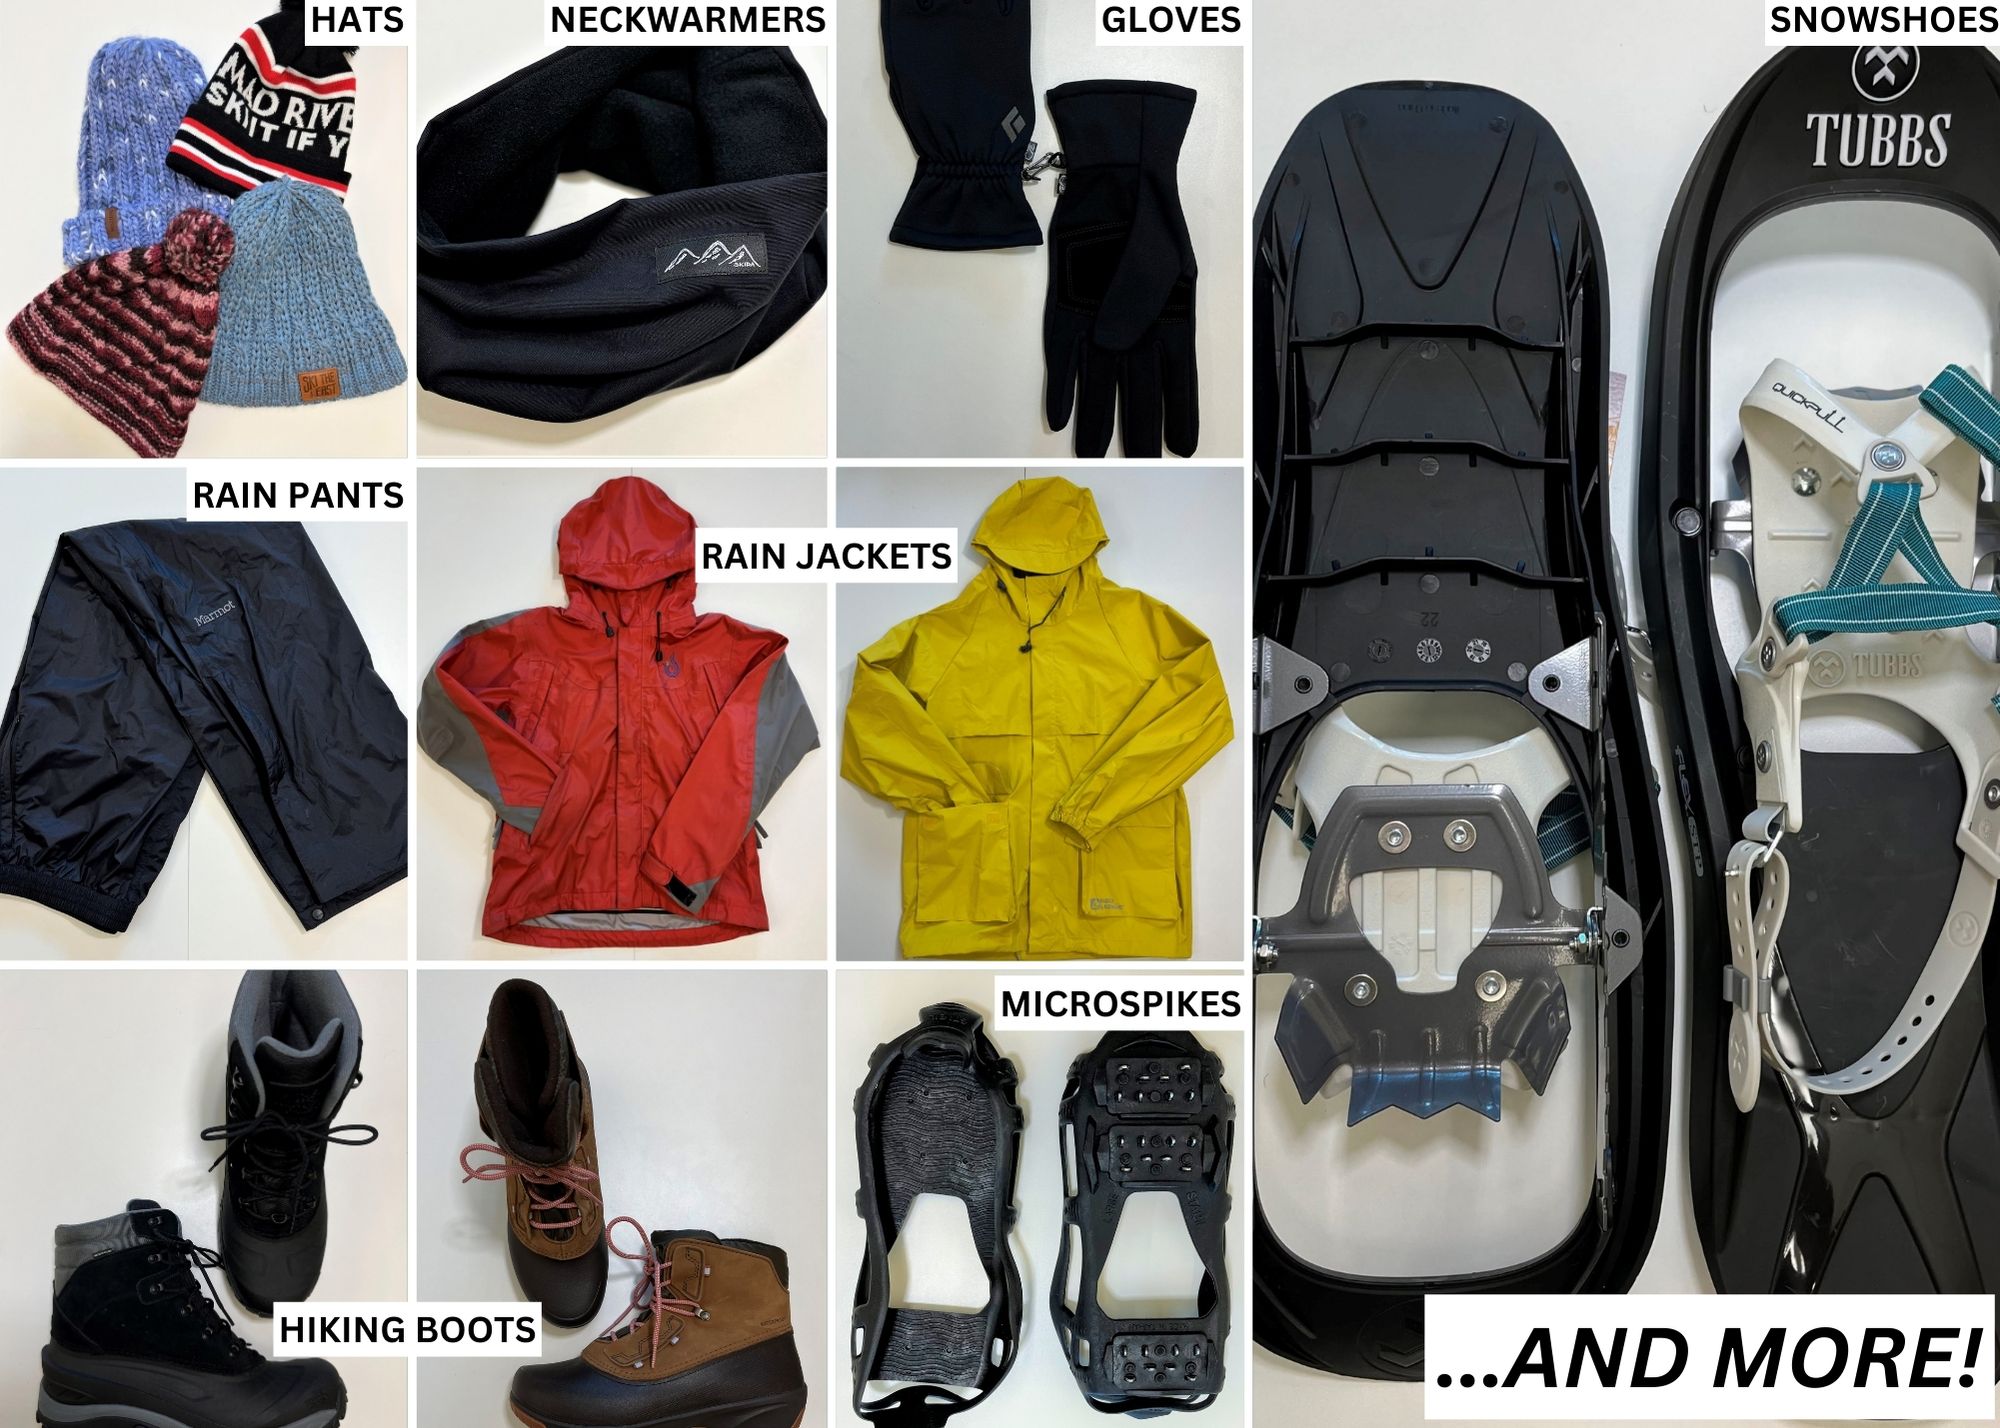 Image collage of a variety of Rubenstein School gear including jackets, microspikes, snowshoes, gloves, and more.